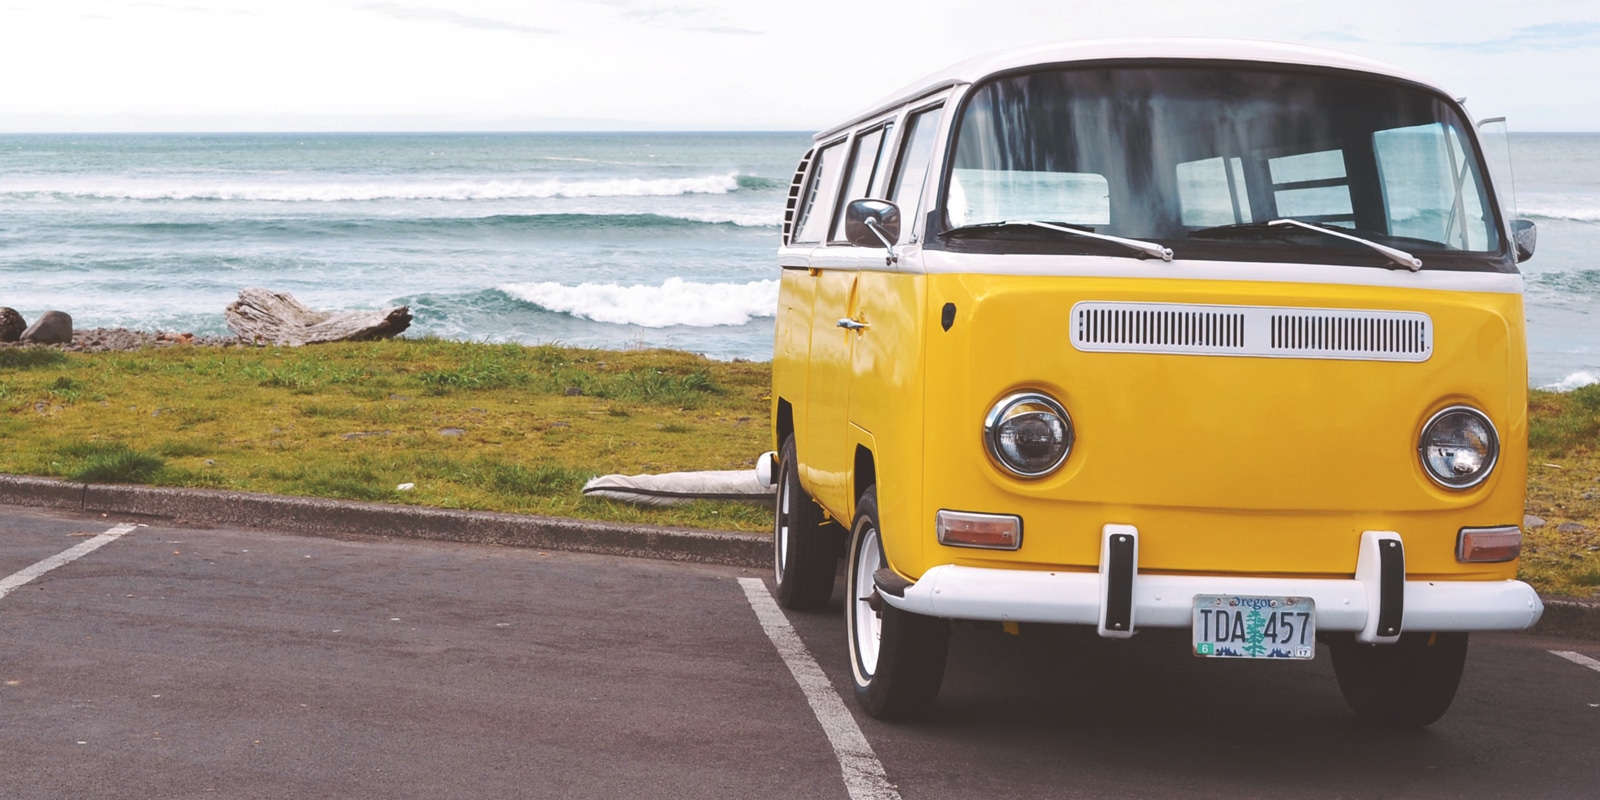 An image of a yellow van parked at a beach